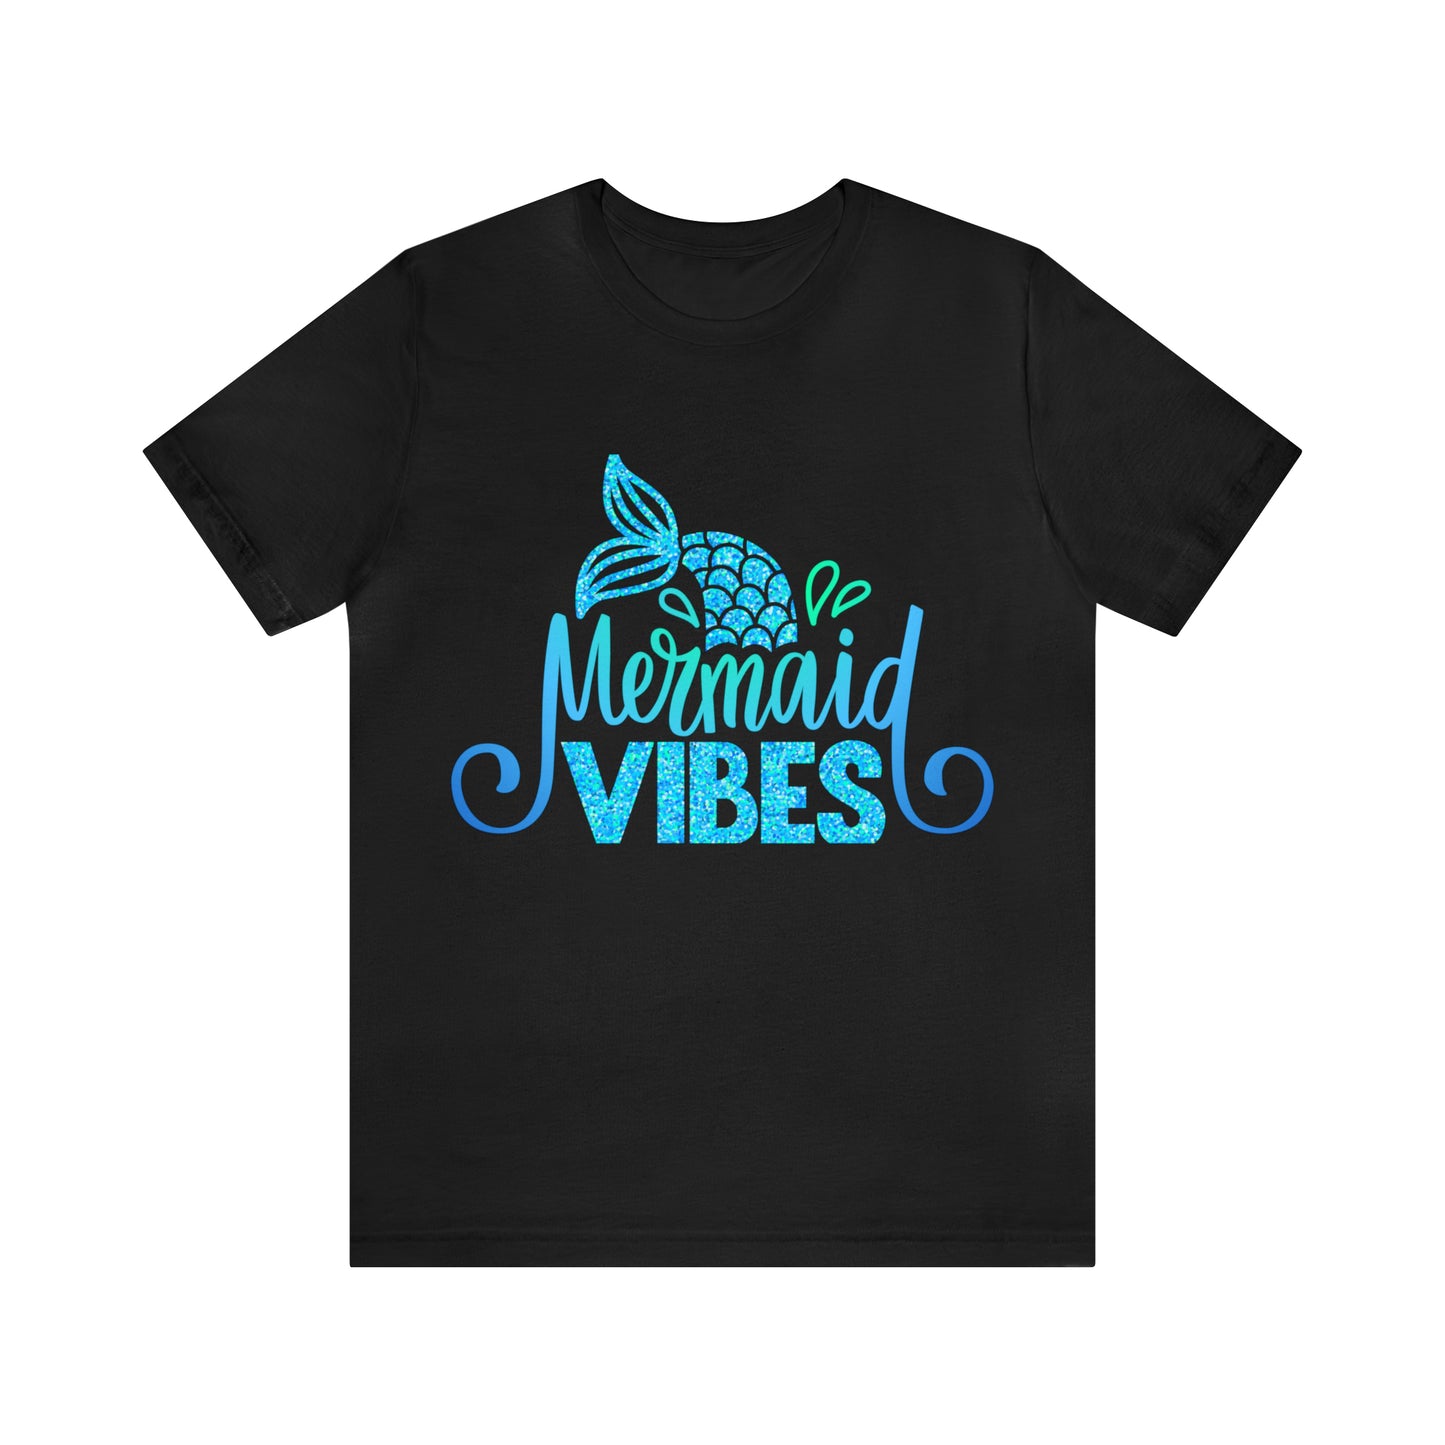 Mermaid Vives T-Shirt - Unisex jersey tee with an enchanting design, soft cotton fabric, and ribbed knit collars, perfect for mermaid enthusiasts and lovers of mermaid-inspired clothing."